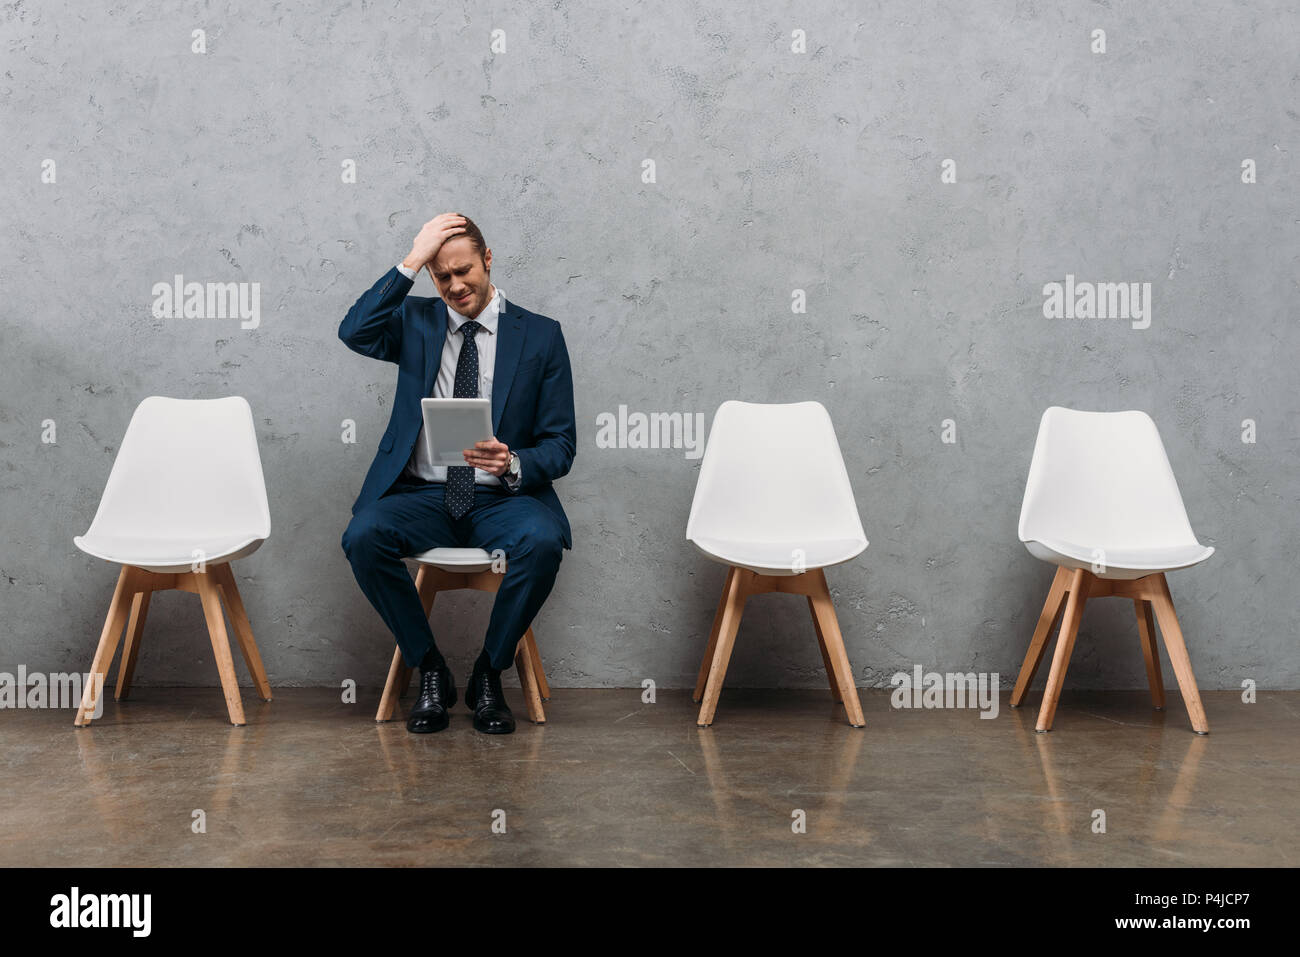 young frustrated businessman sitting on chair with tablet Stock Photo